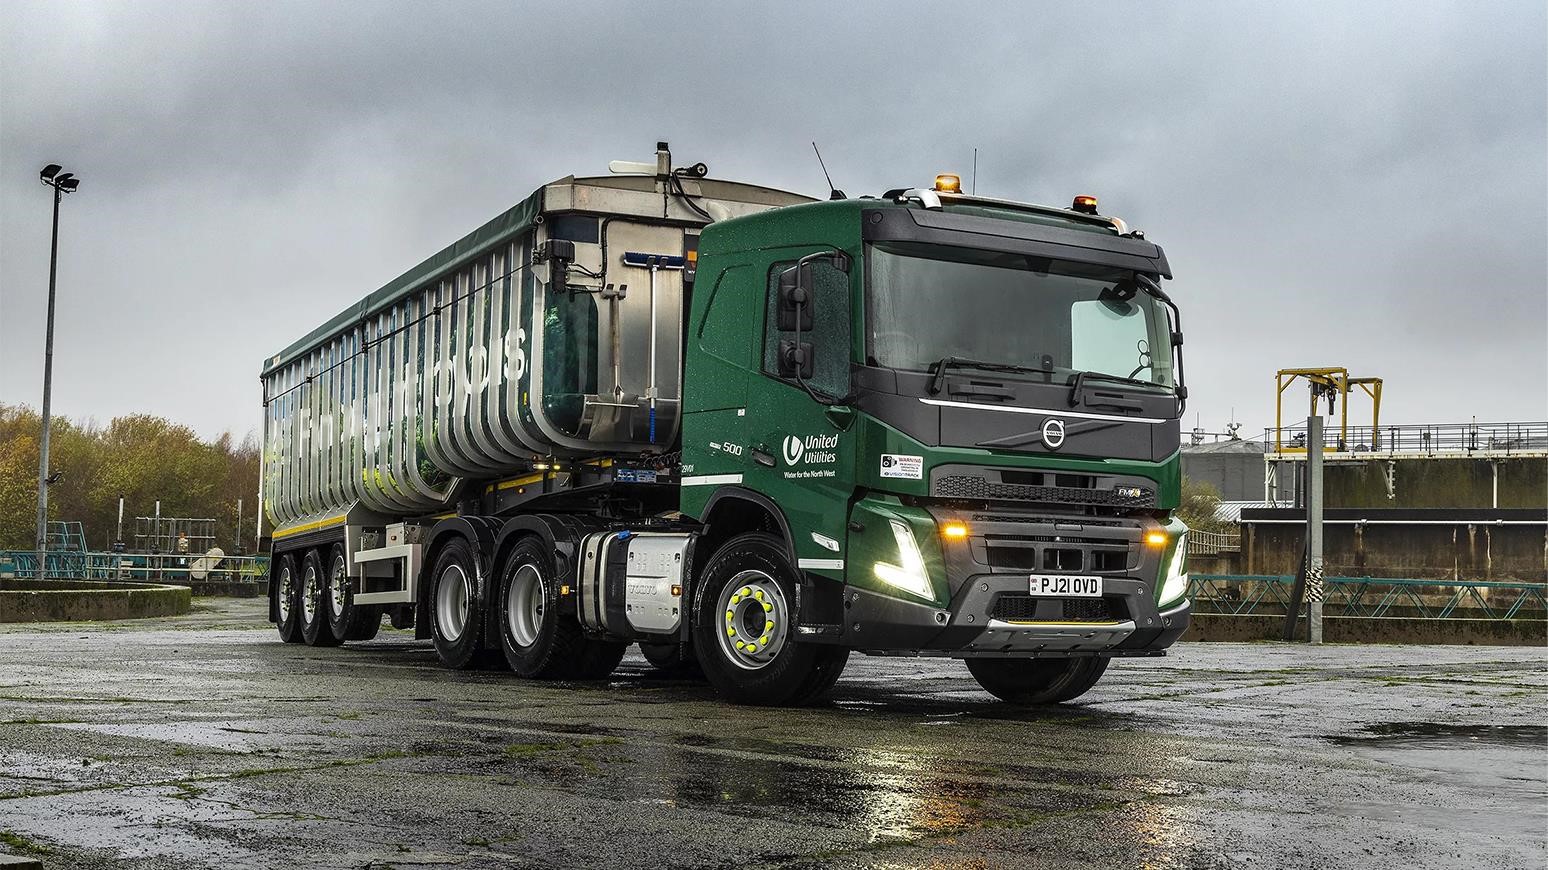 Driver Preference & Advanced Safety Features Drive United Utilities’ Acquisition Of Two New Volvo FMX Tractor Units